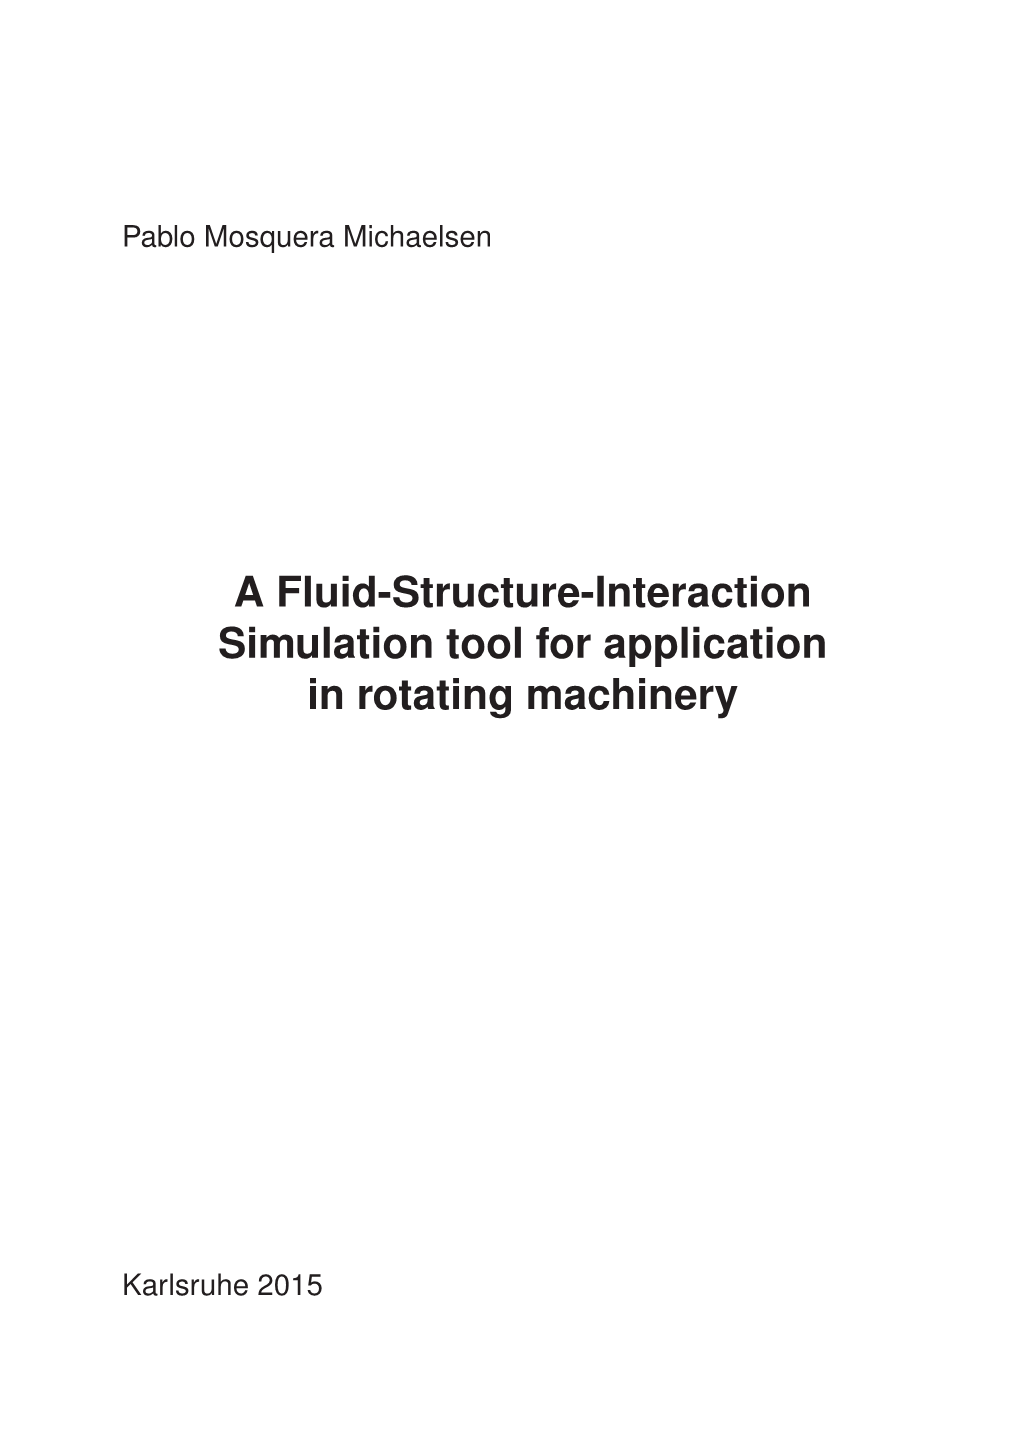 A Fluid-Structure-Interaction Simulation Tool for Application in Rotating Machinery